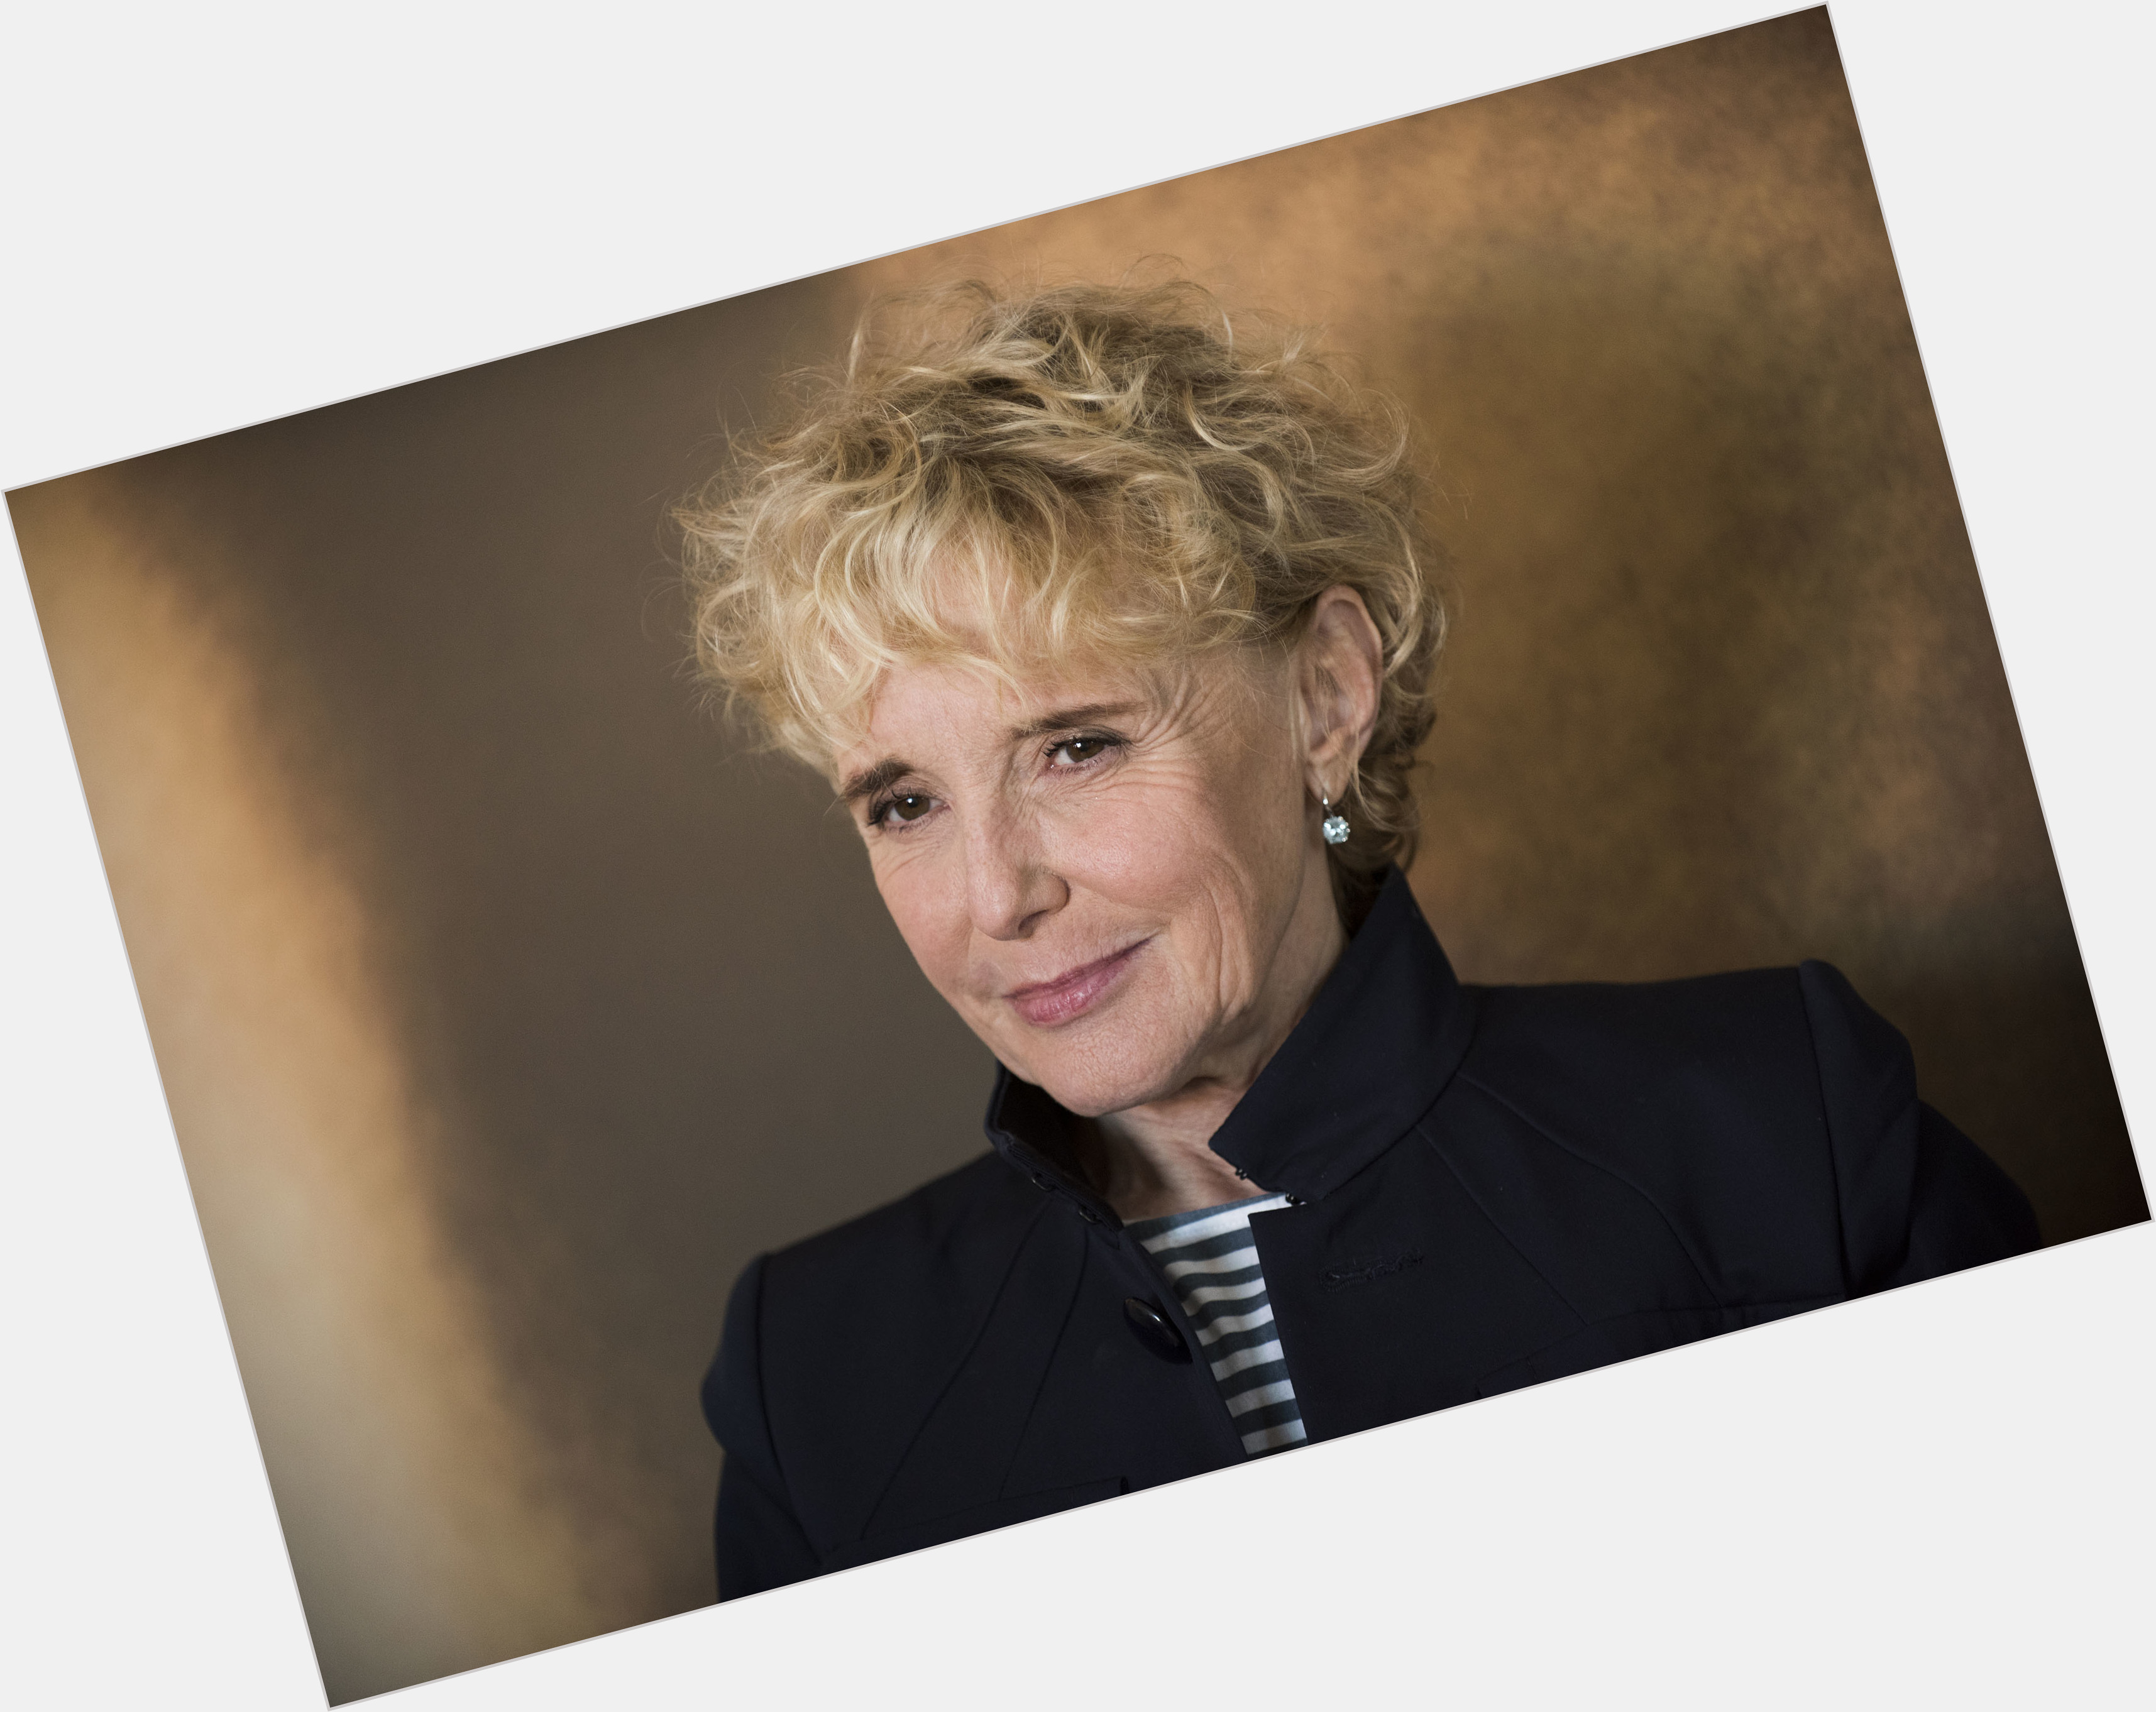 Http://fanpagepress.net/m/C/Claire Denis New Pic 1